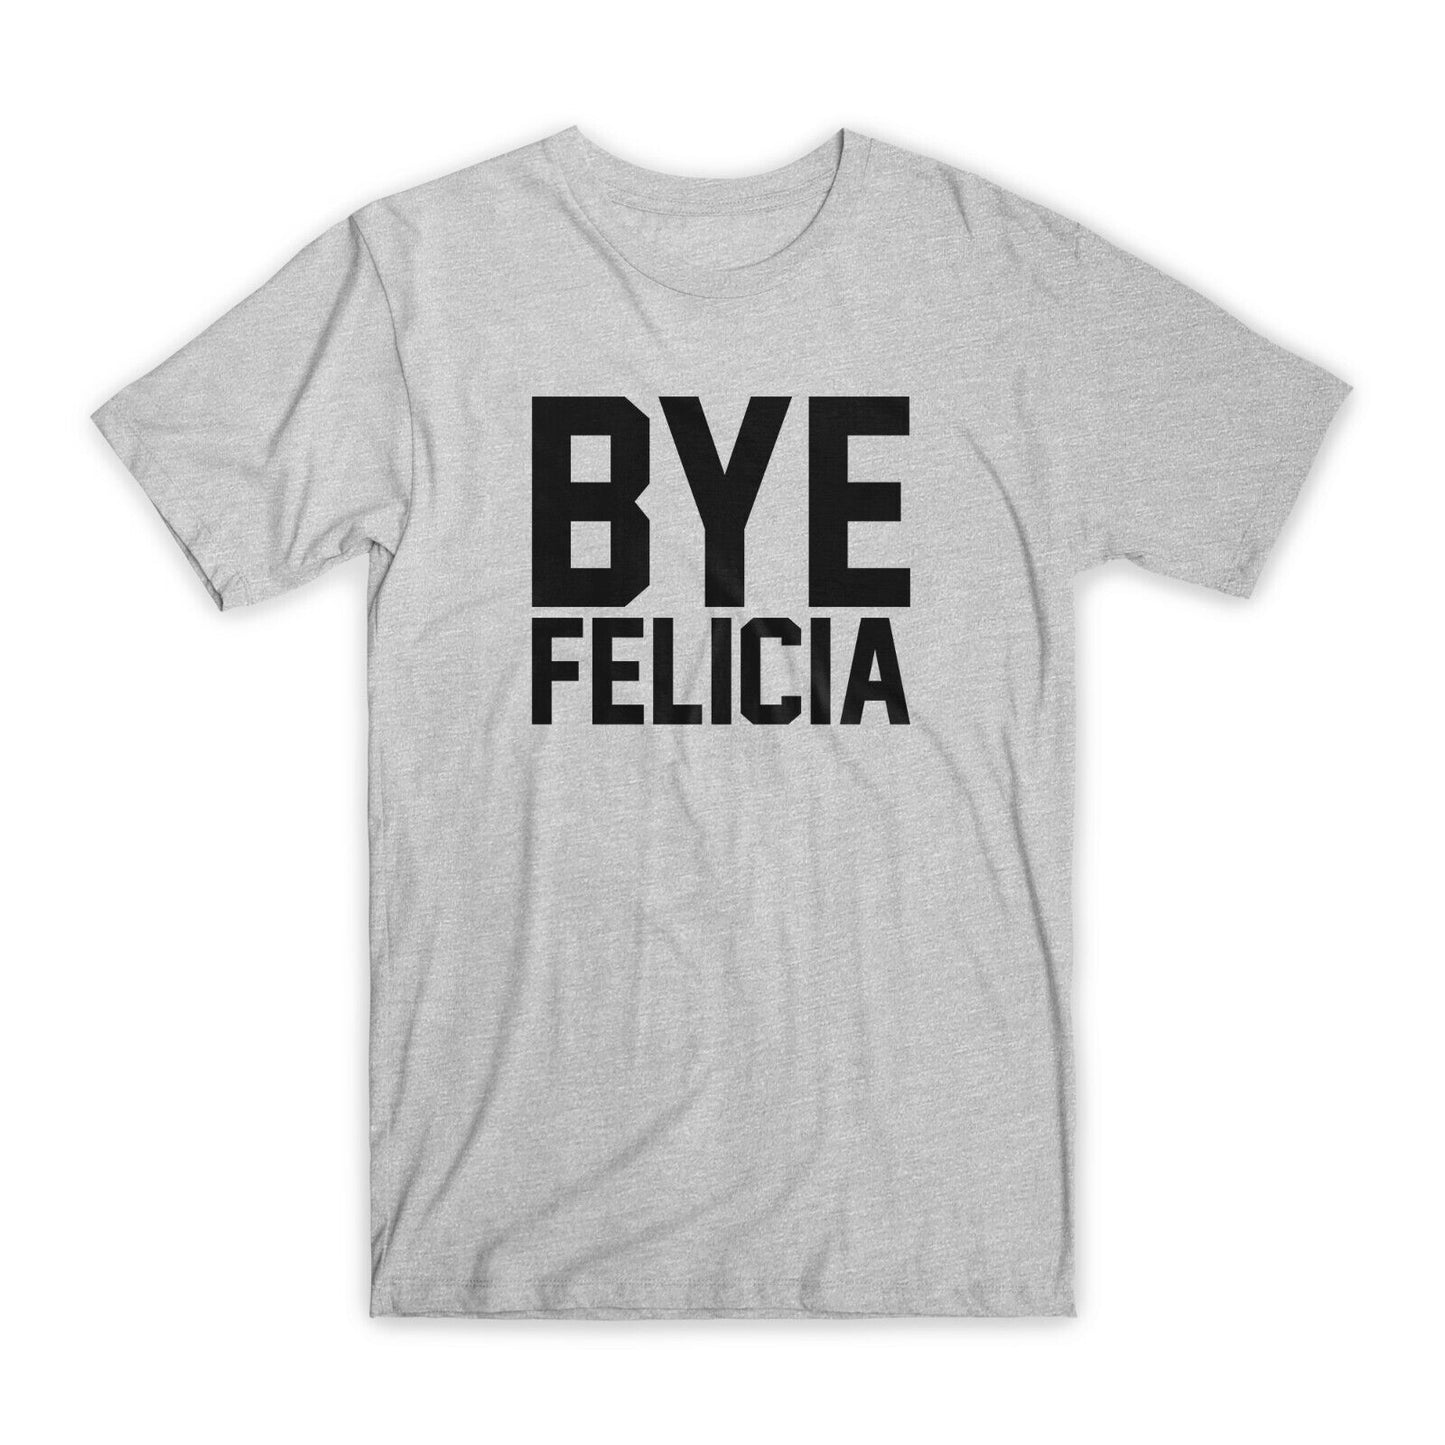 Bye Felicia T-Shirt Premium Soft Cotton Crew Neck Funny Tees Novelty Gifts NEW